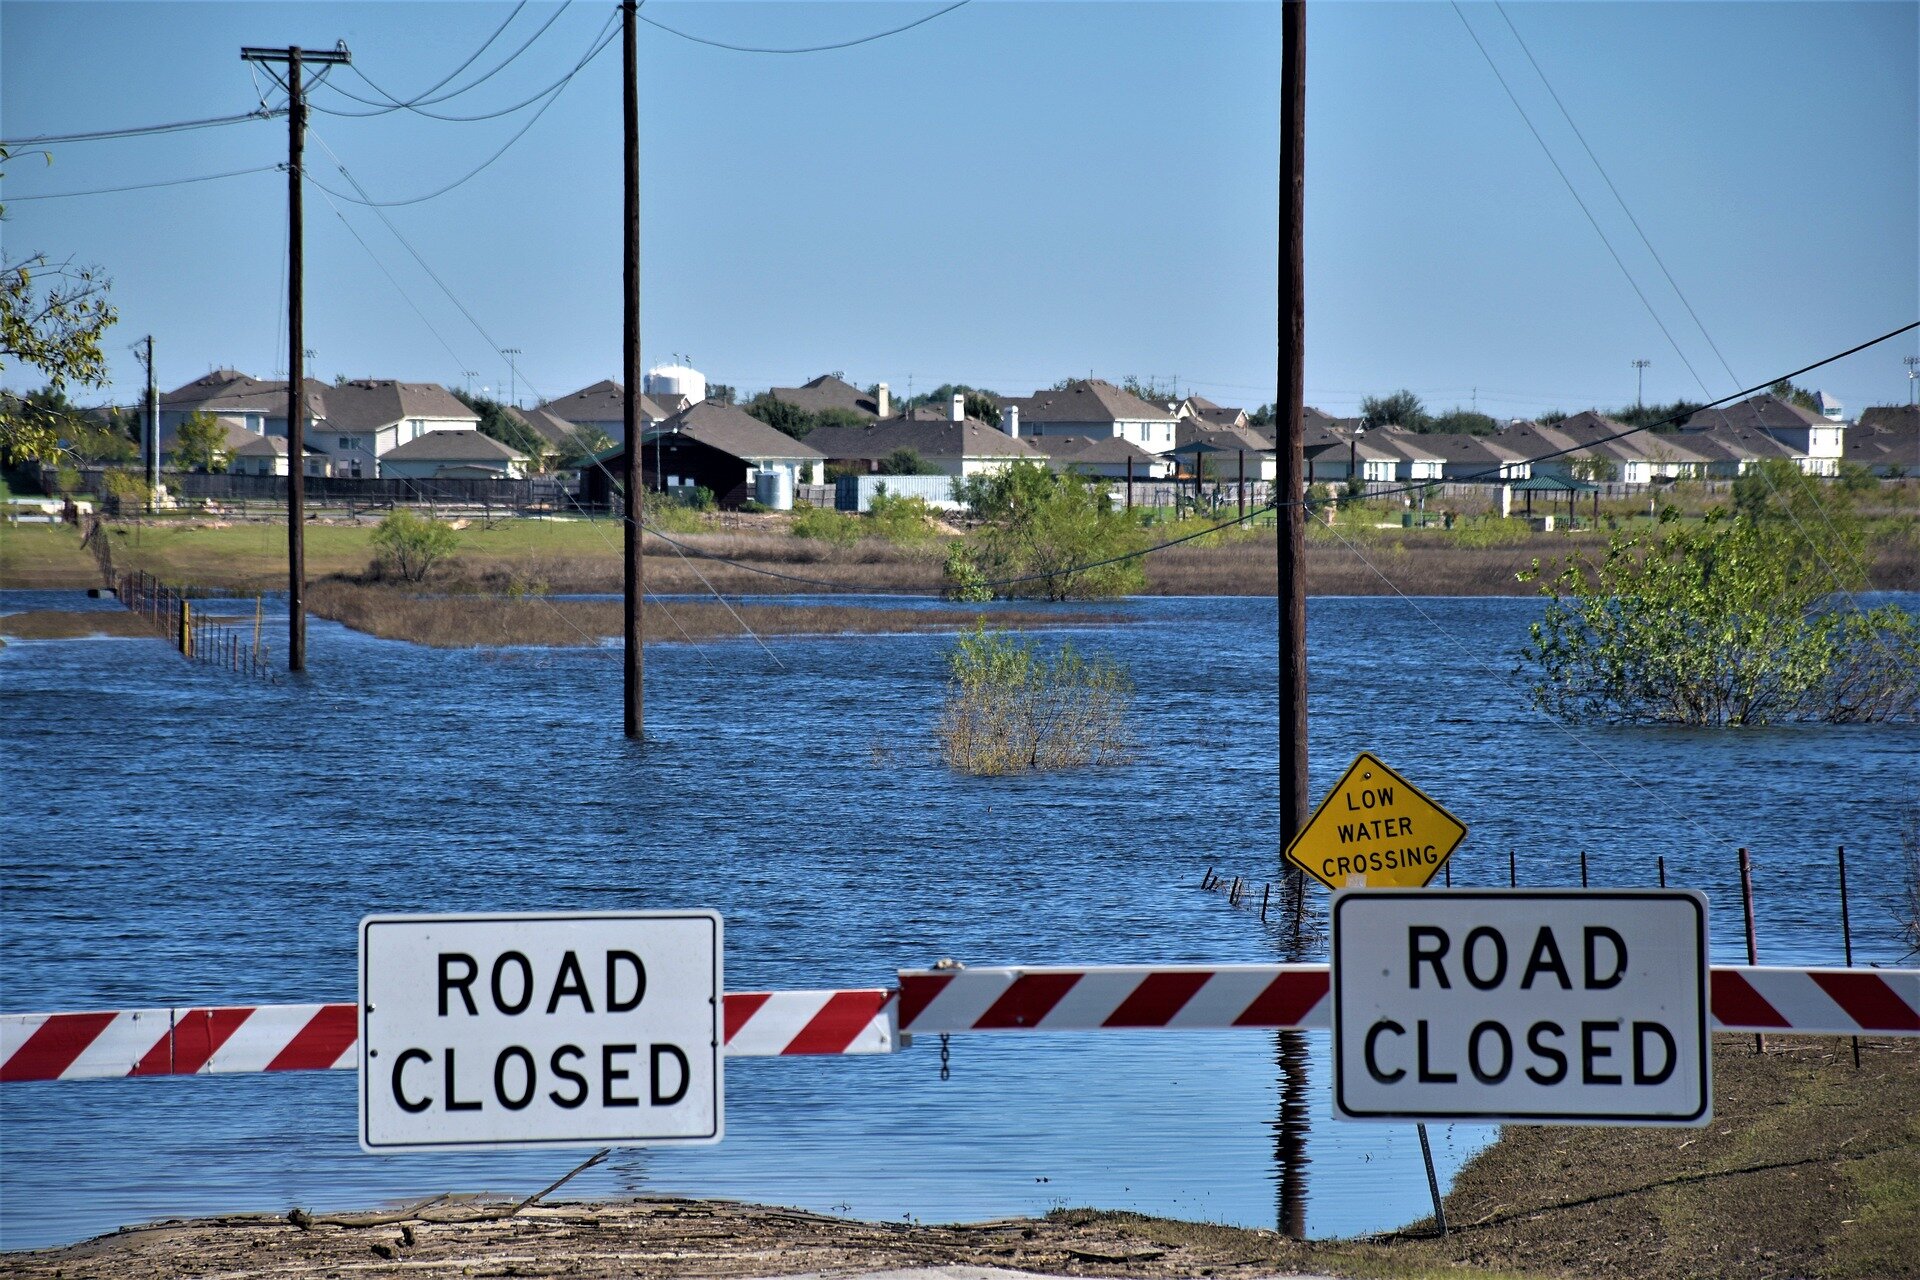 Flood risk mapping is a public good, so why the public resistance in Canada?